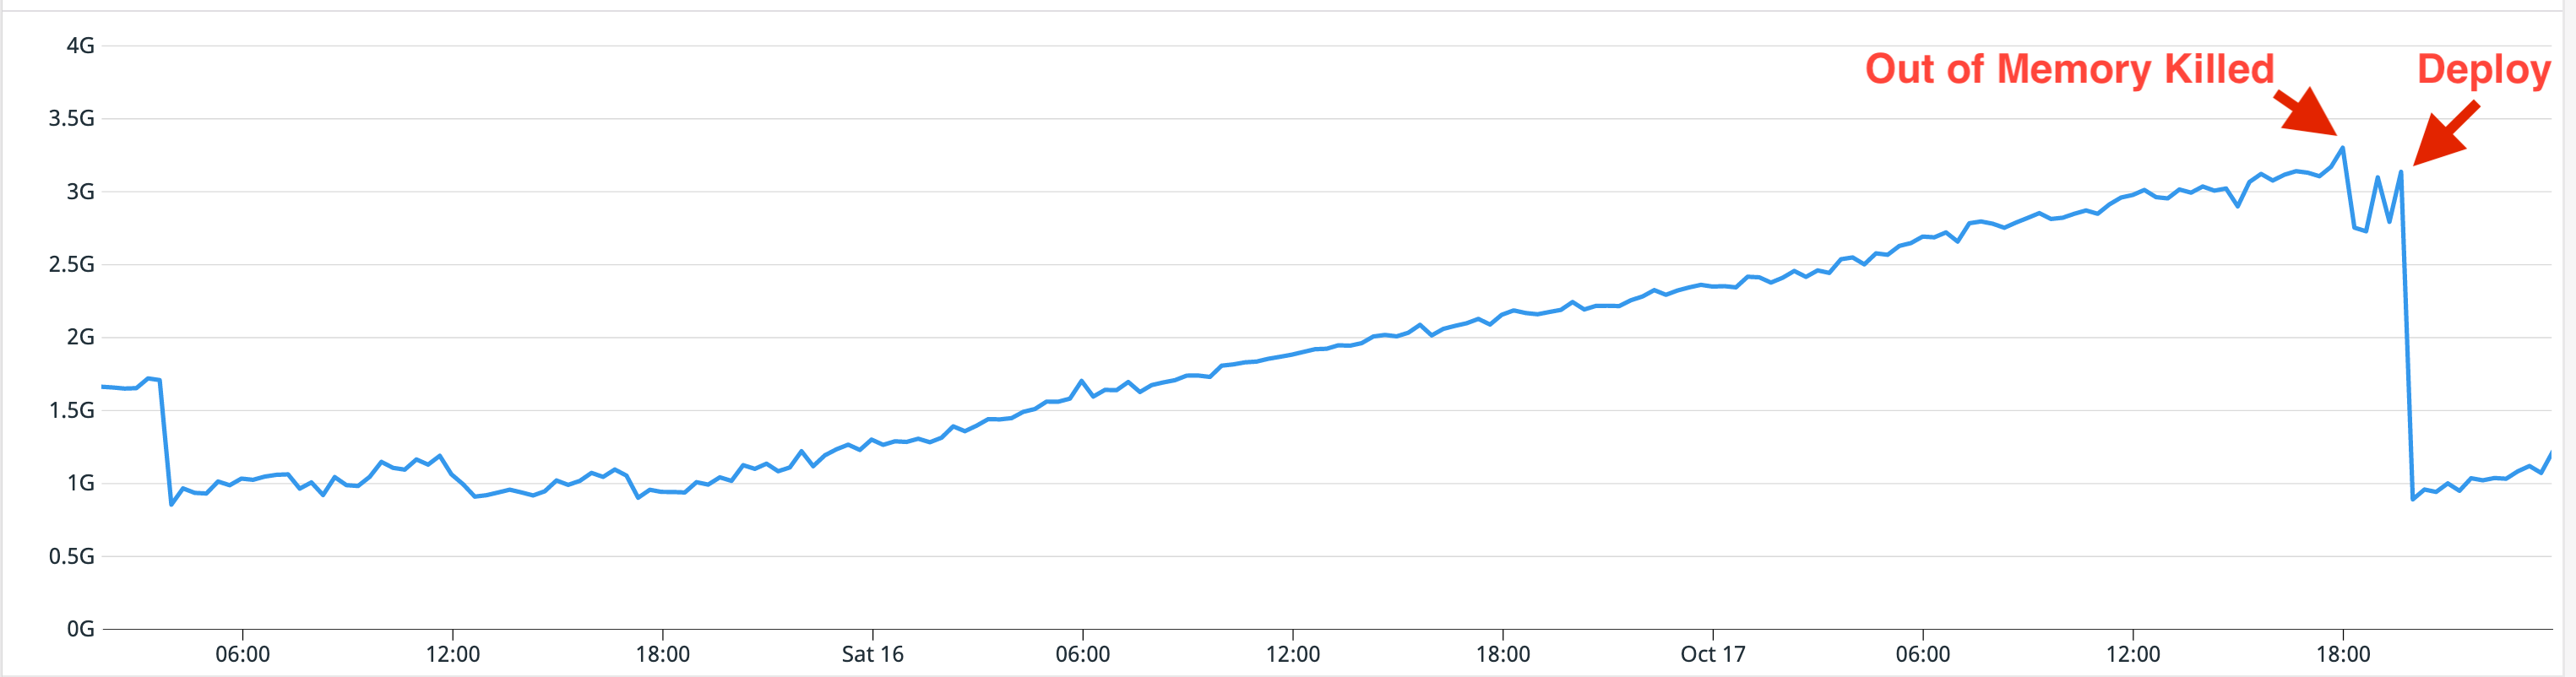 Memory usage graph before the memory leaks were fixed